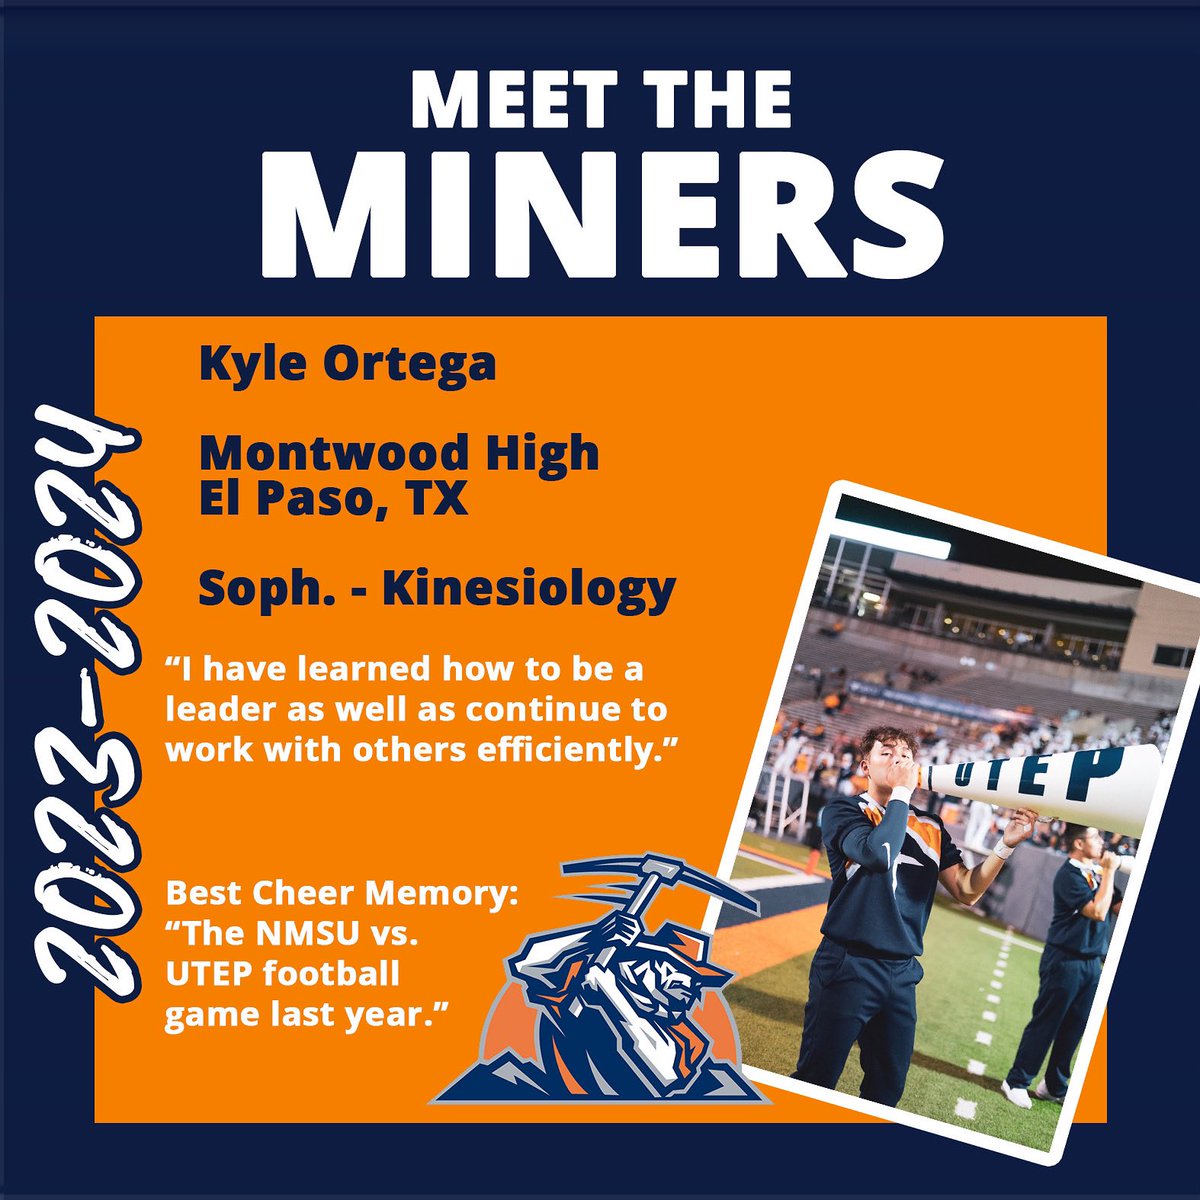 Welcome back to our 2nd year Kyle, we are looking forward to another amazing year! ⛏️
#picksup #gominers